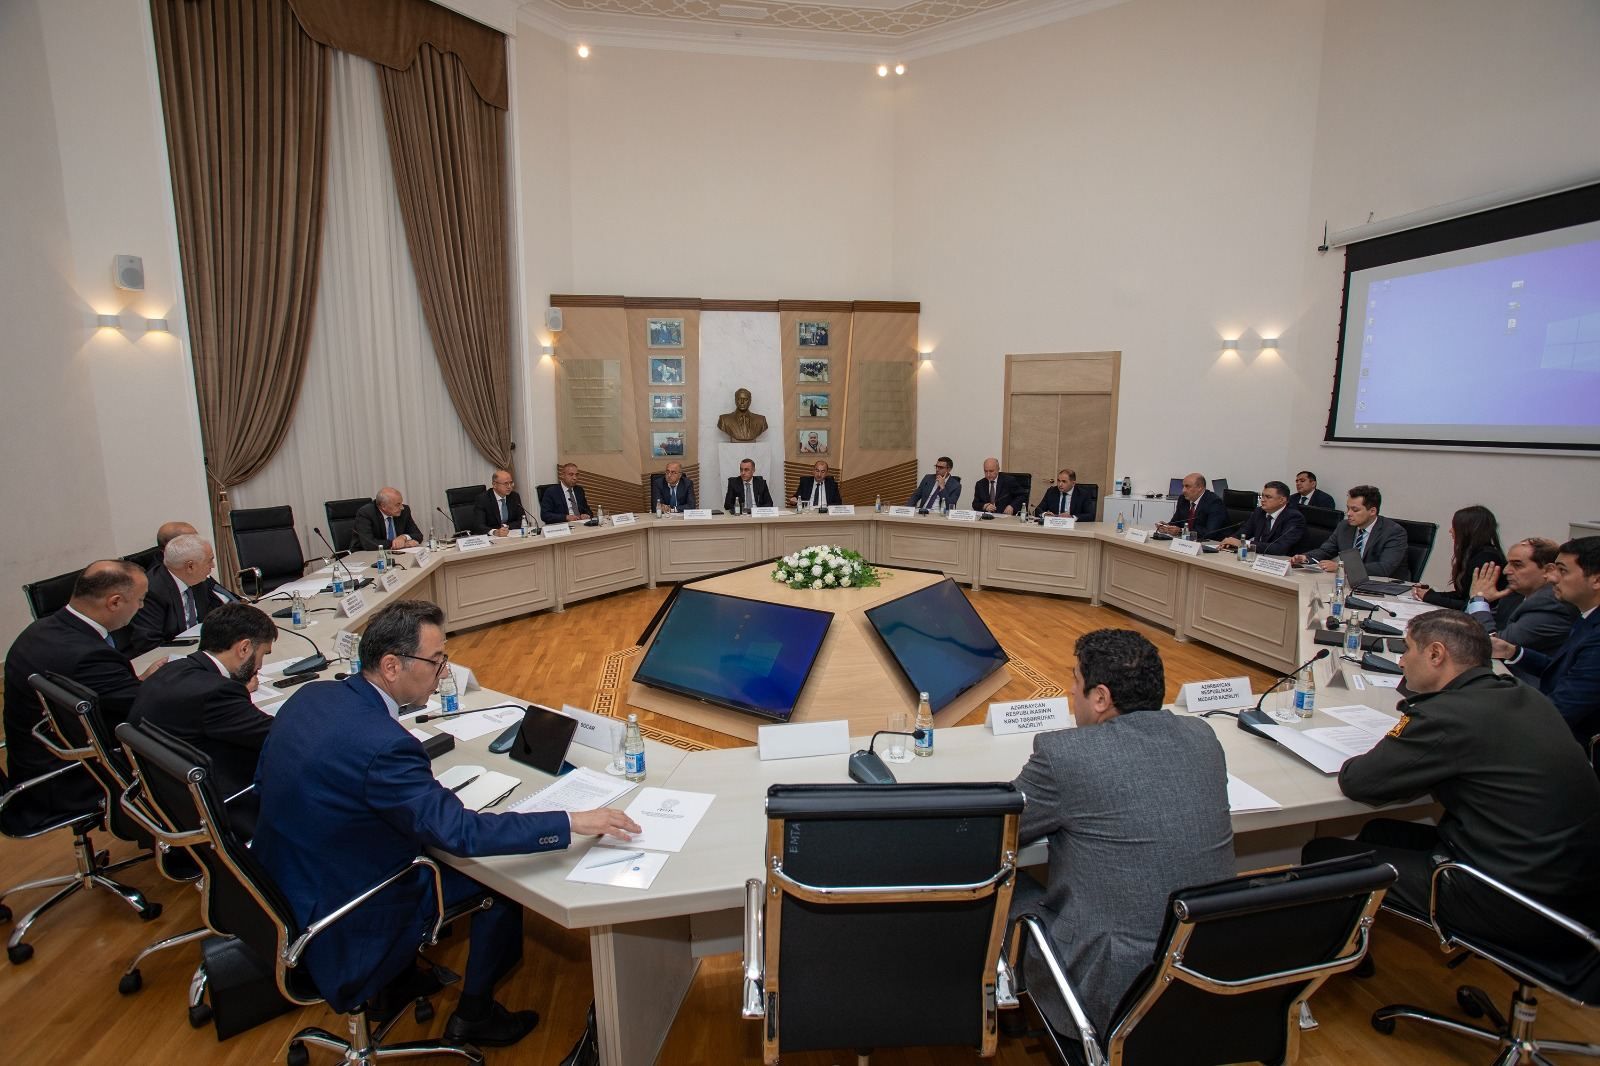 Regular meetings of Commission for Renewable Energy Sources took place